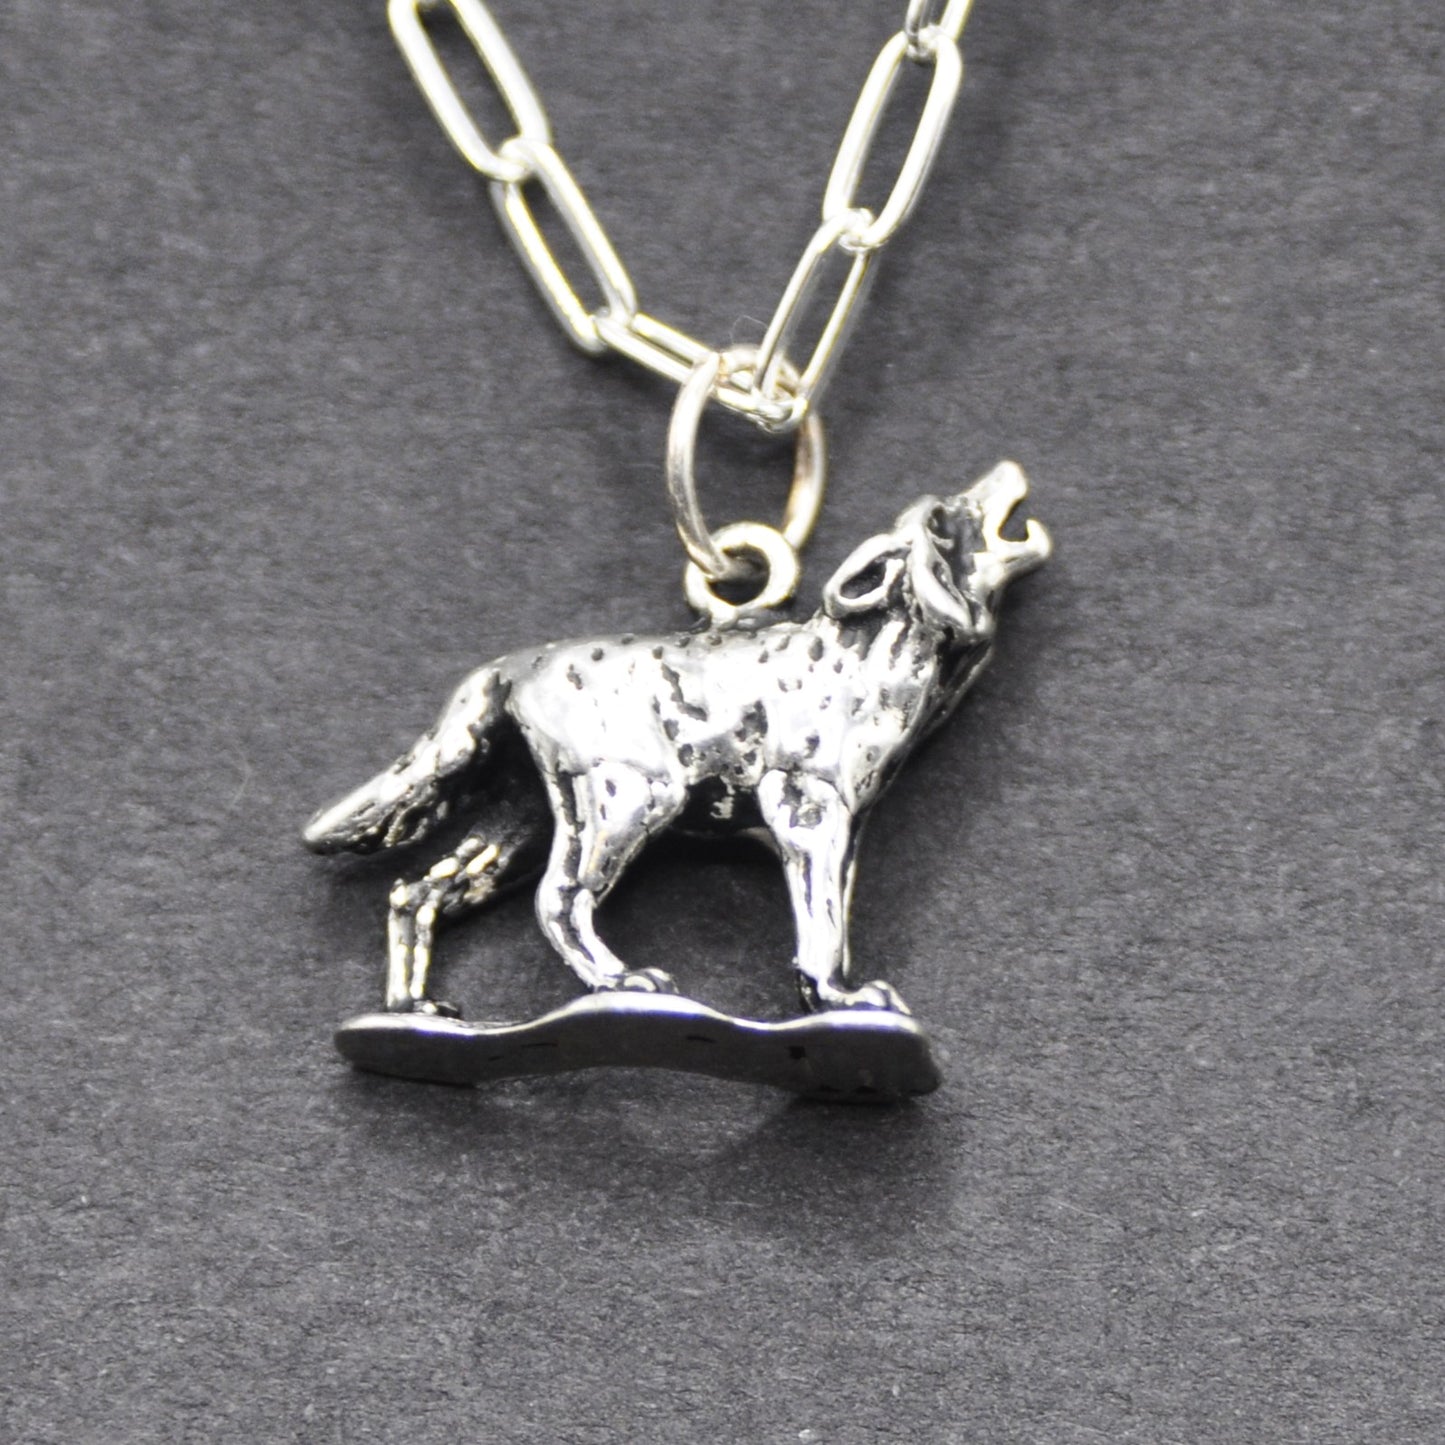 Wolf Necklace Recycled Sterling Silver .925 Cable Chain Endangered Species